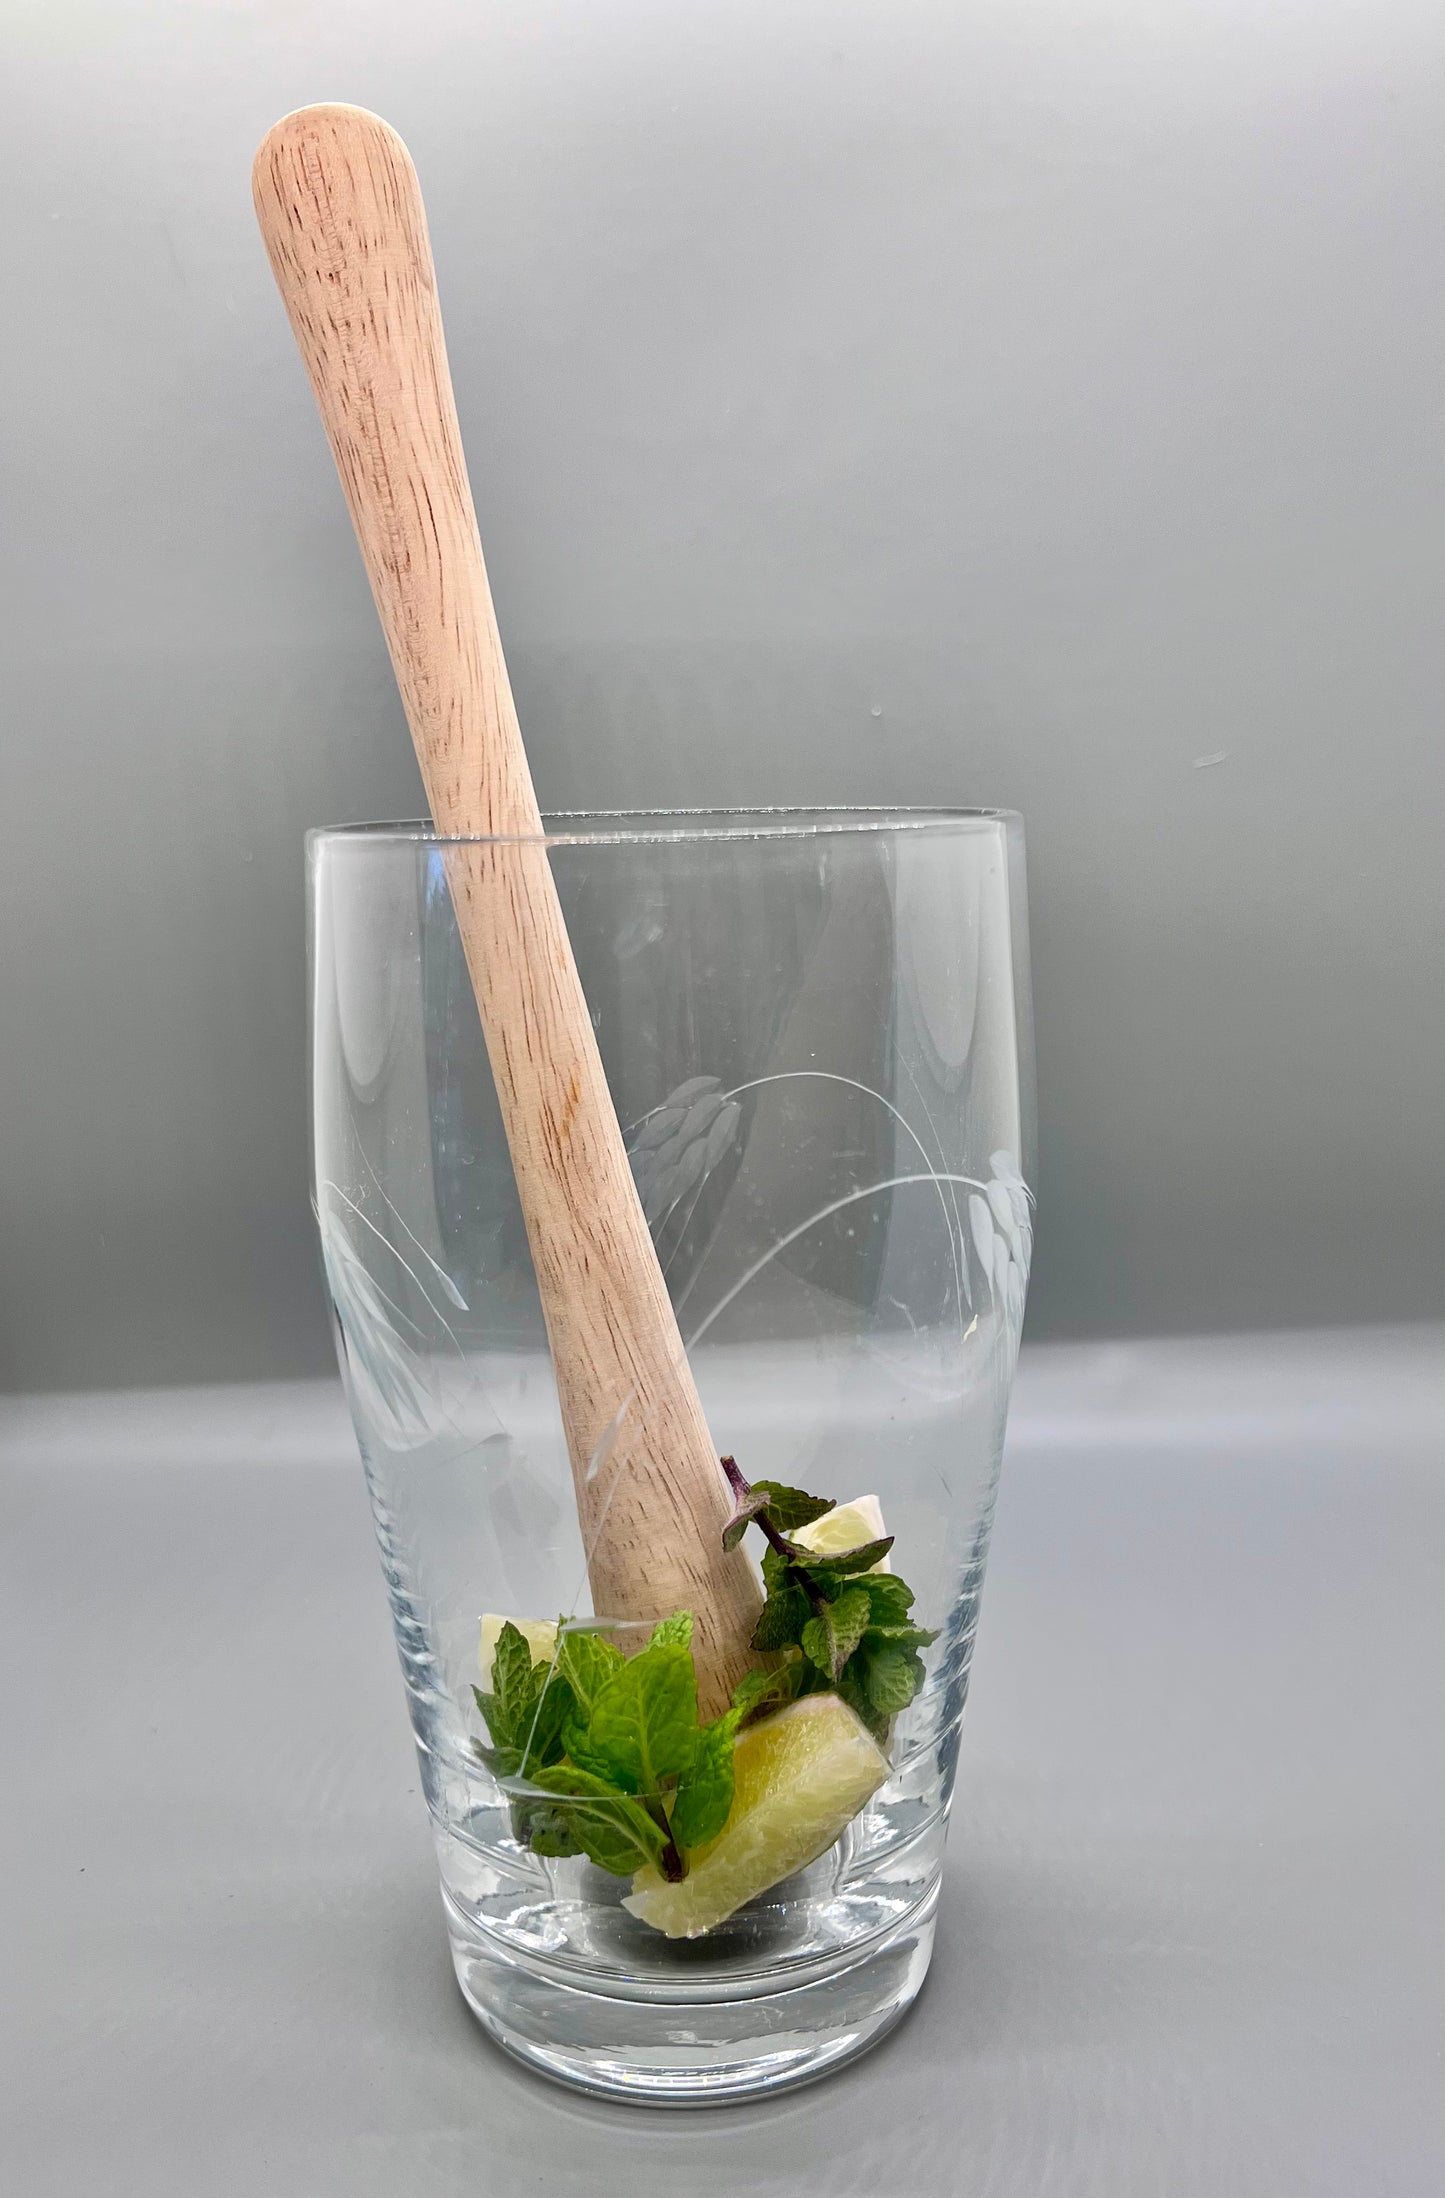 9.75 inch wood muddler in mixing glass with mint and limes